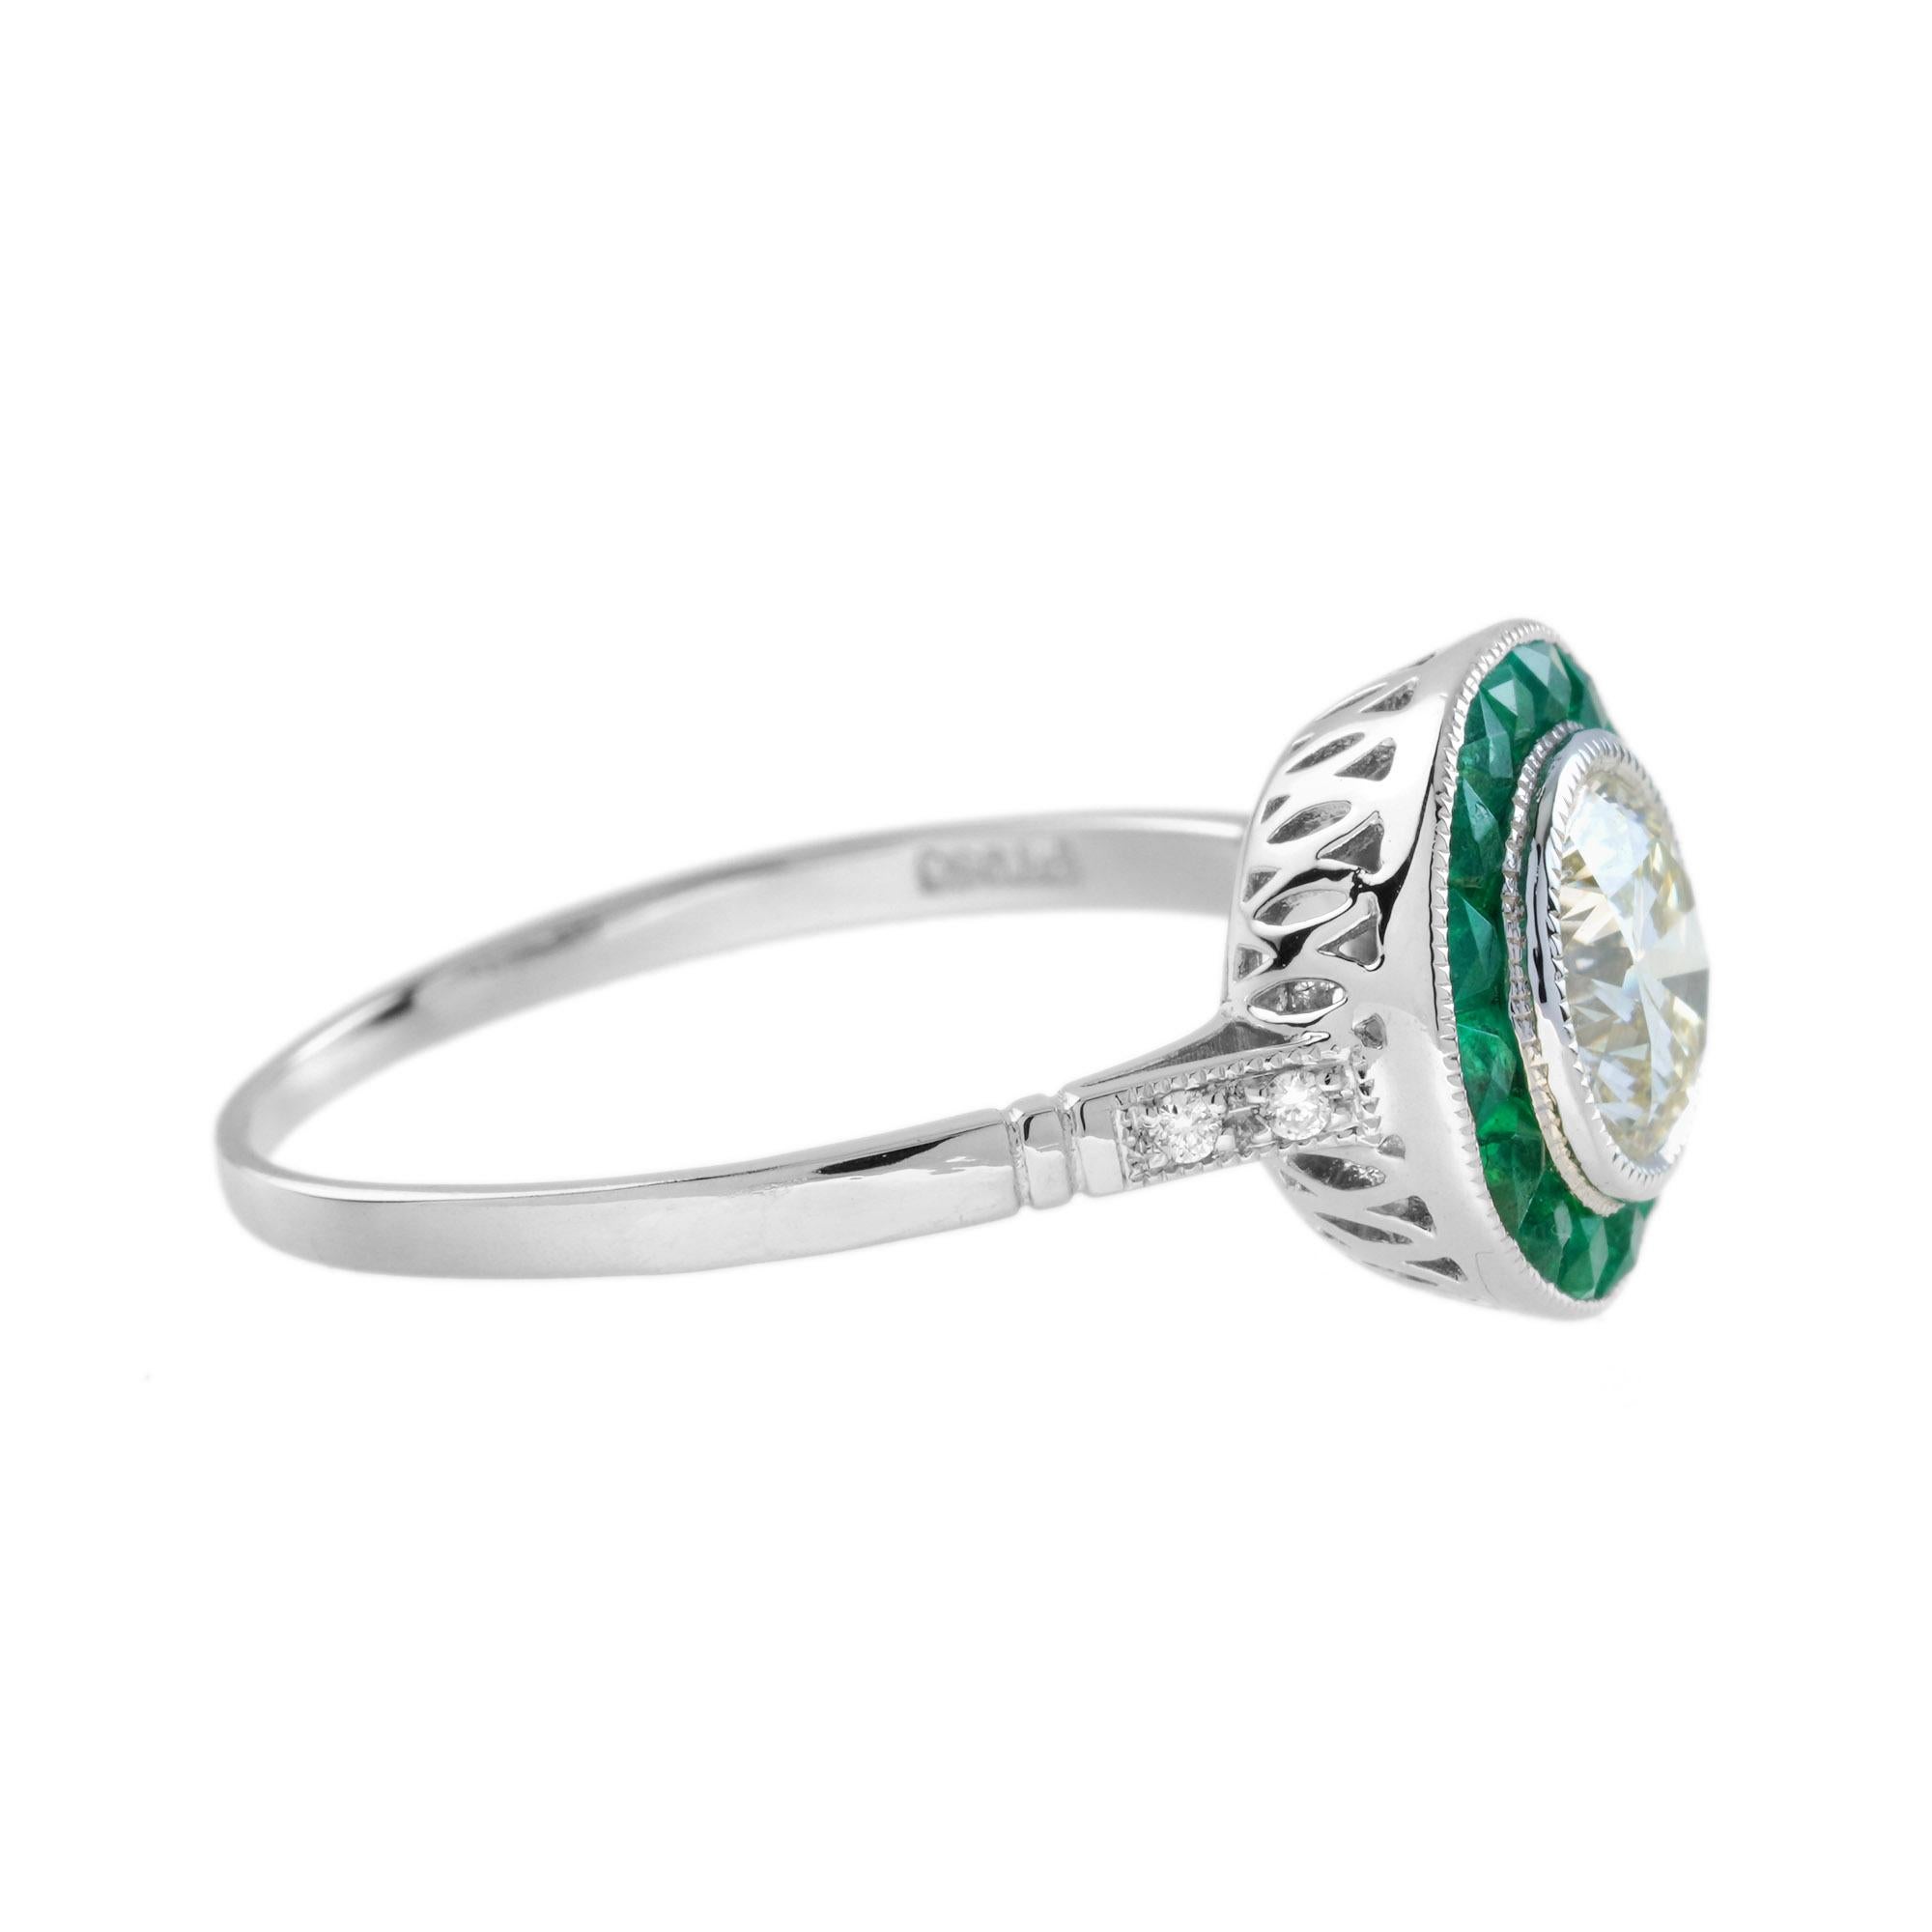 Women's or Men's Certified 1 Ct. Diamond and Emerald Art Deco Style Target Ring in Platinum 950 For Sale